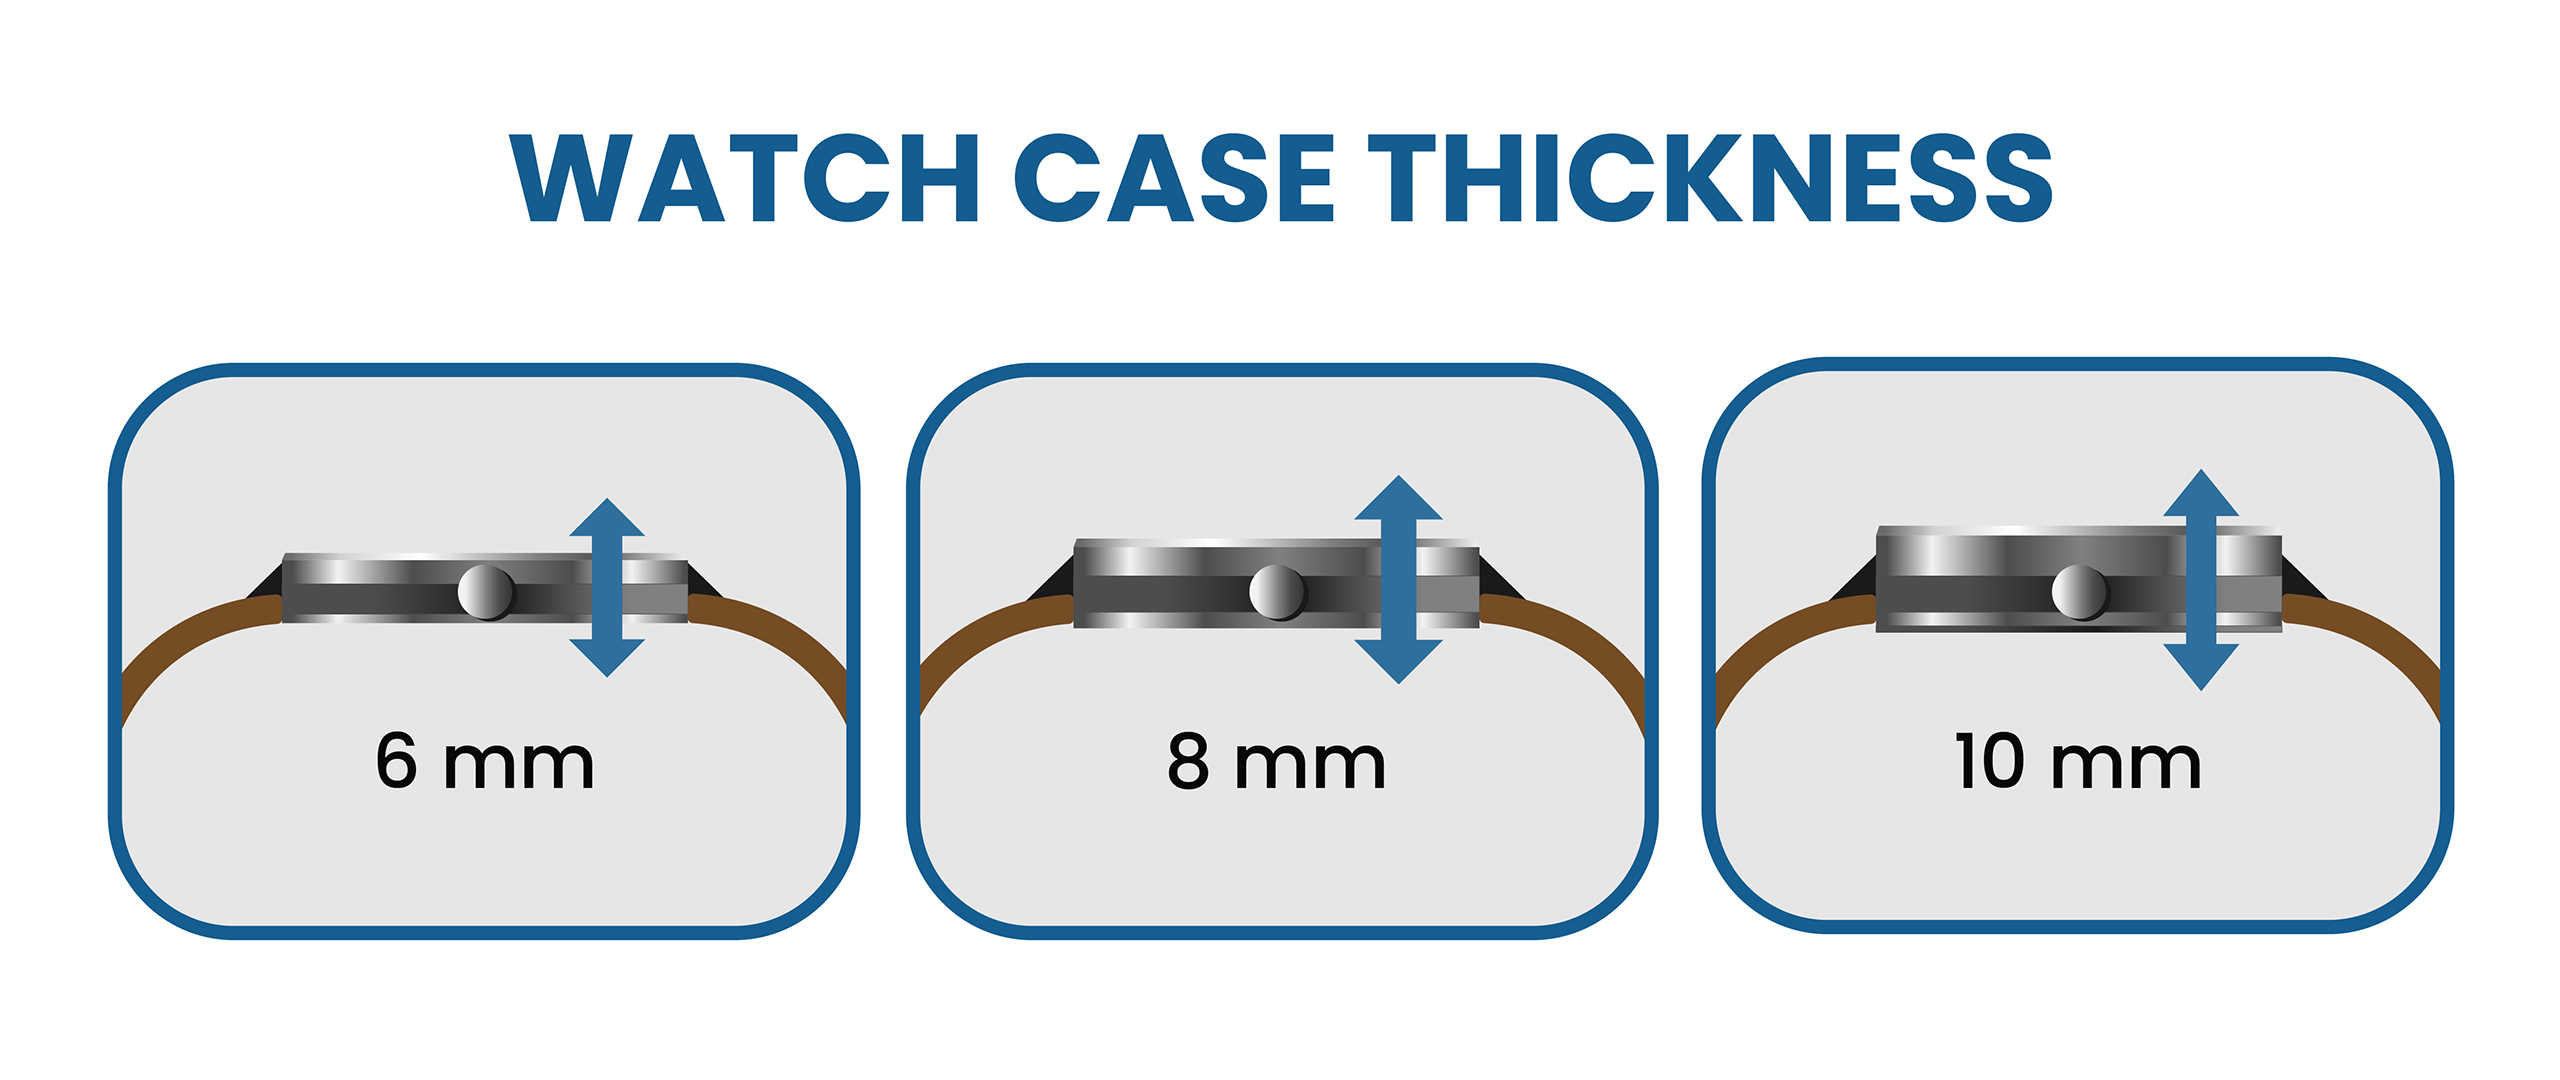 watch case thickness